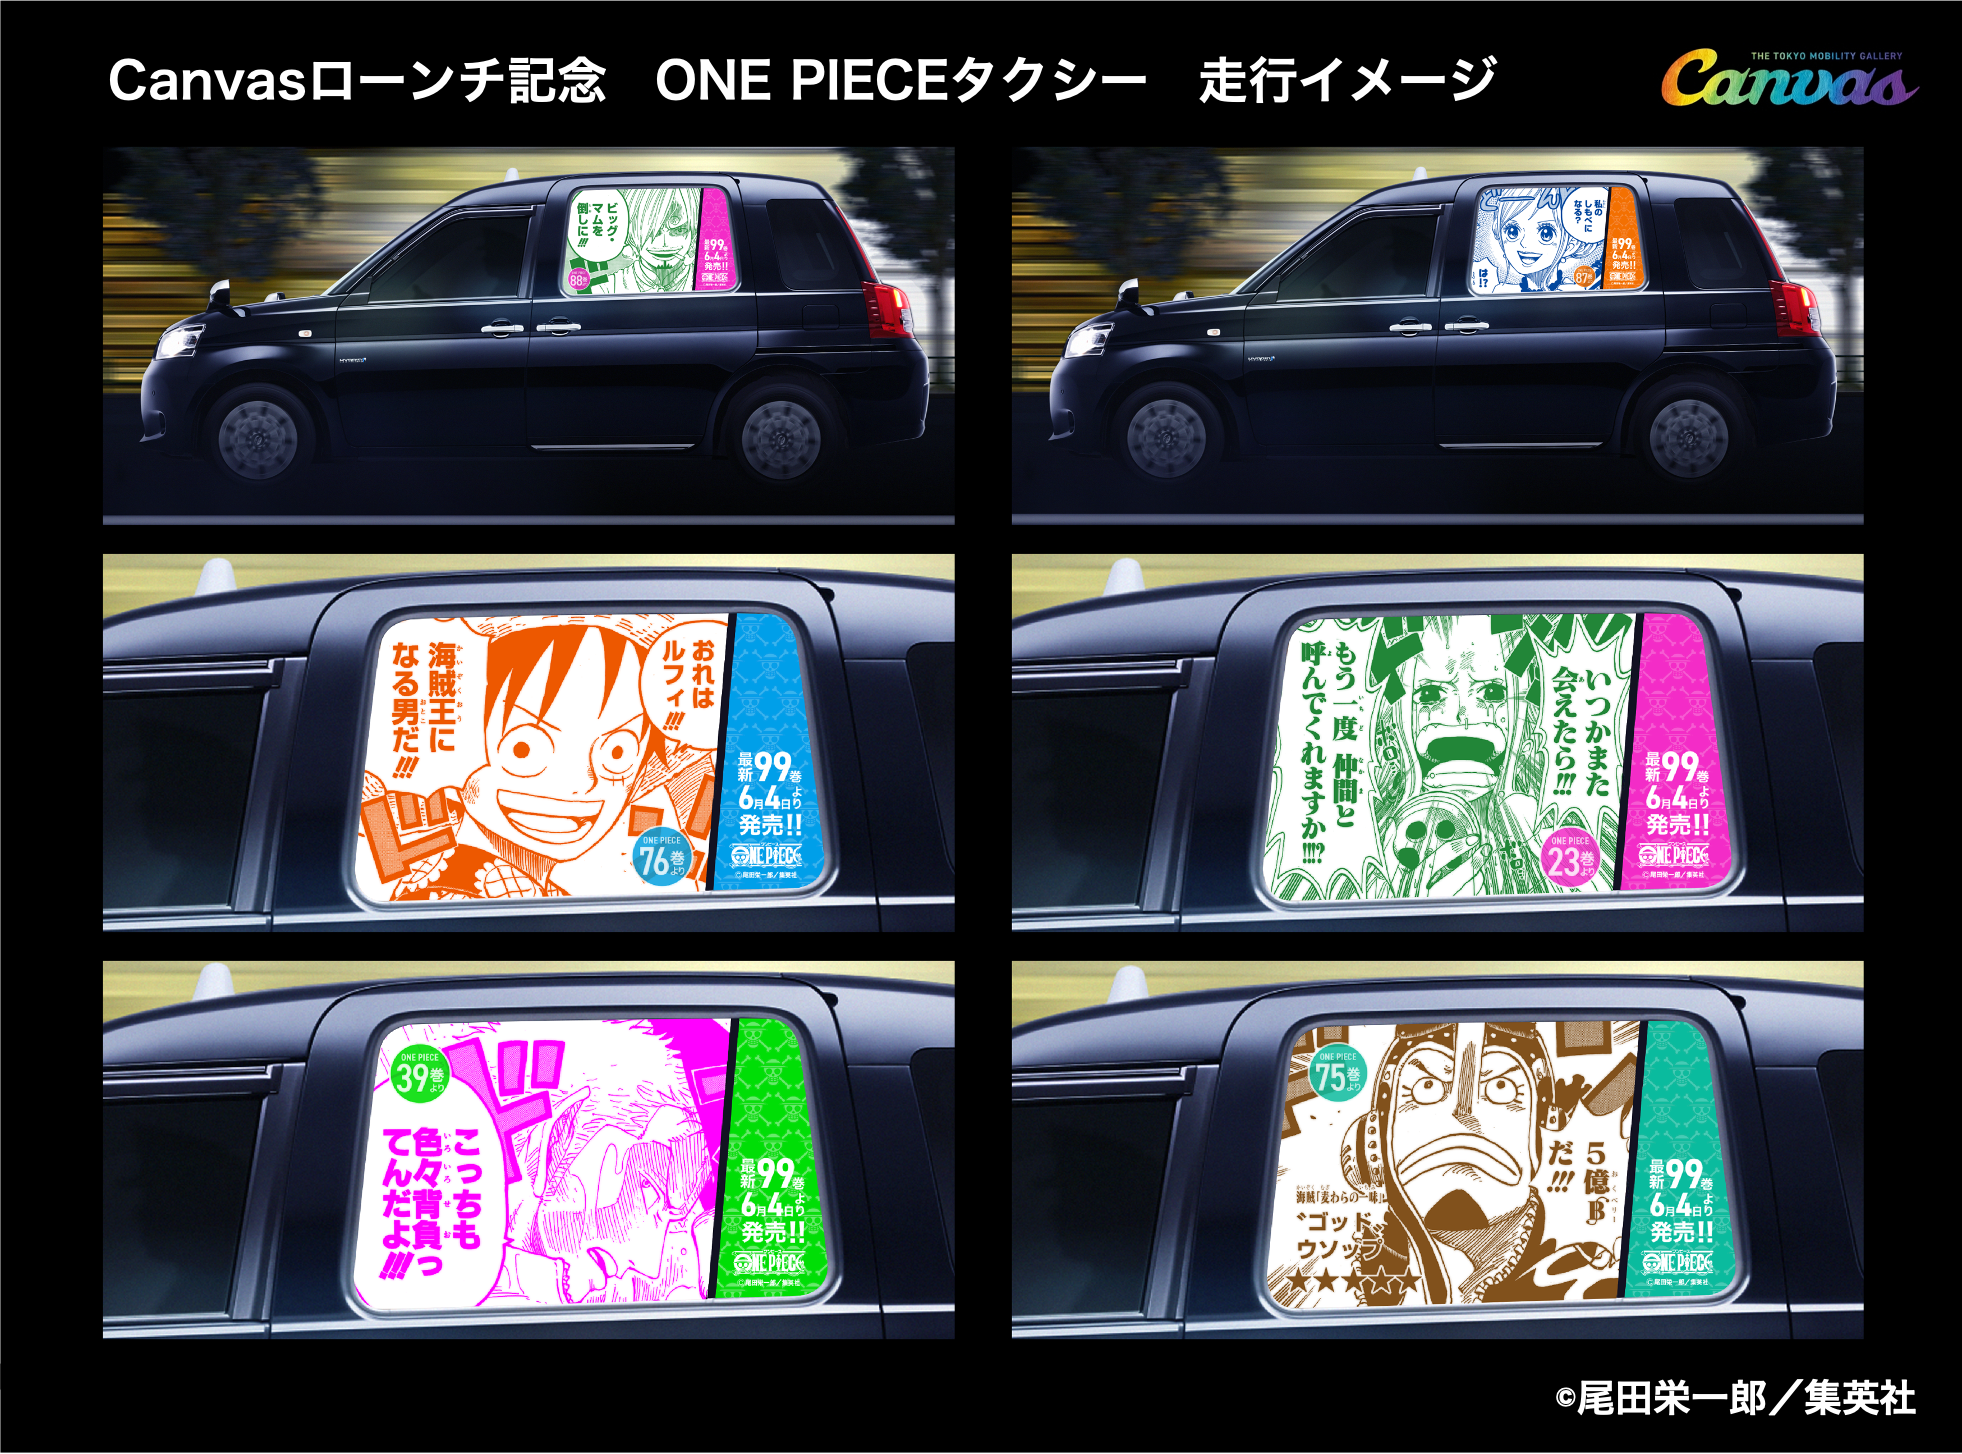 100 Taxis Around Tokyo Now Have One Piece Manga Scenes In Their Windows